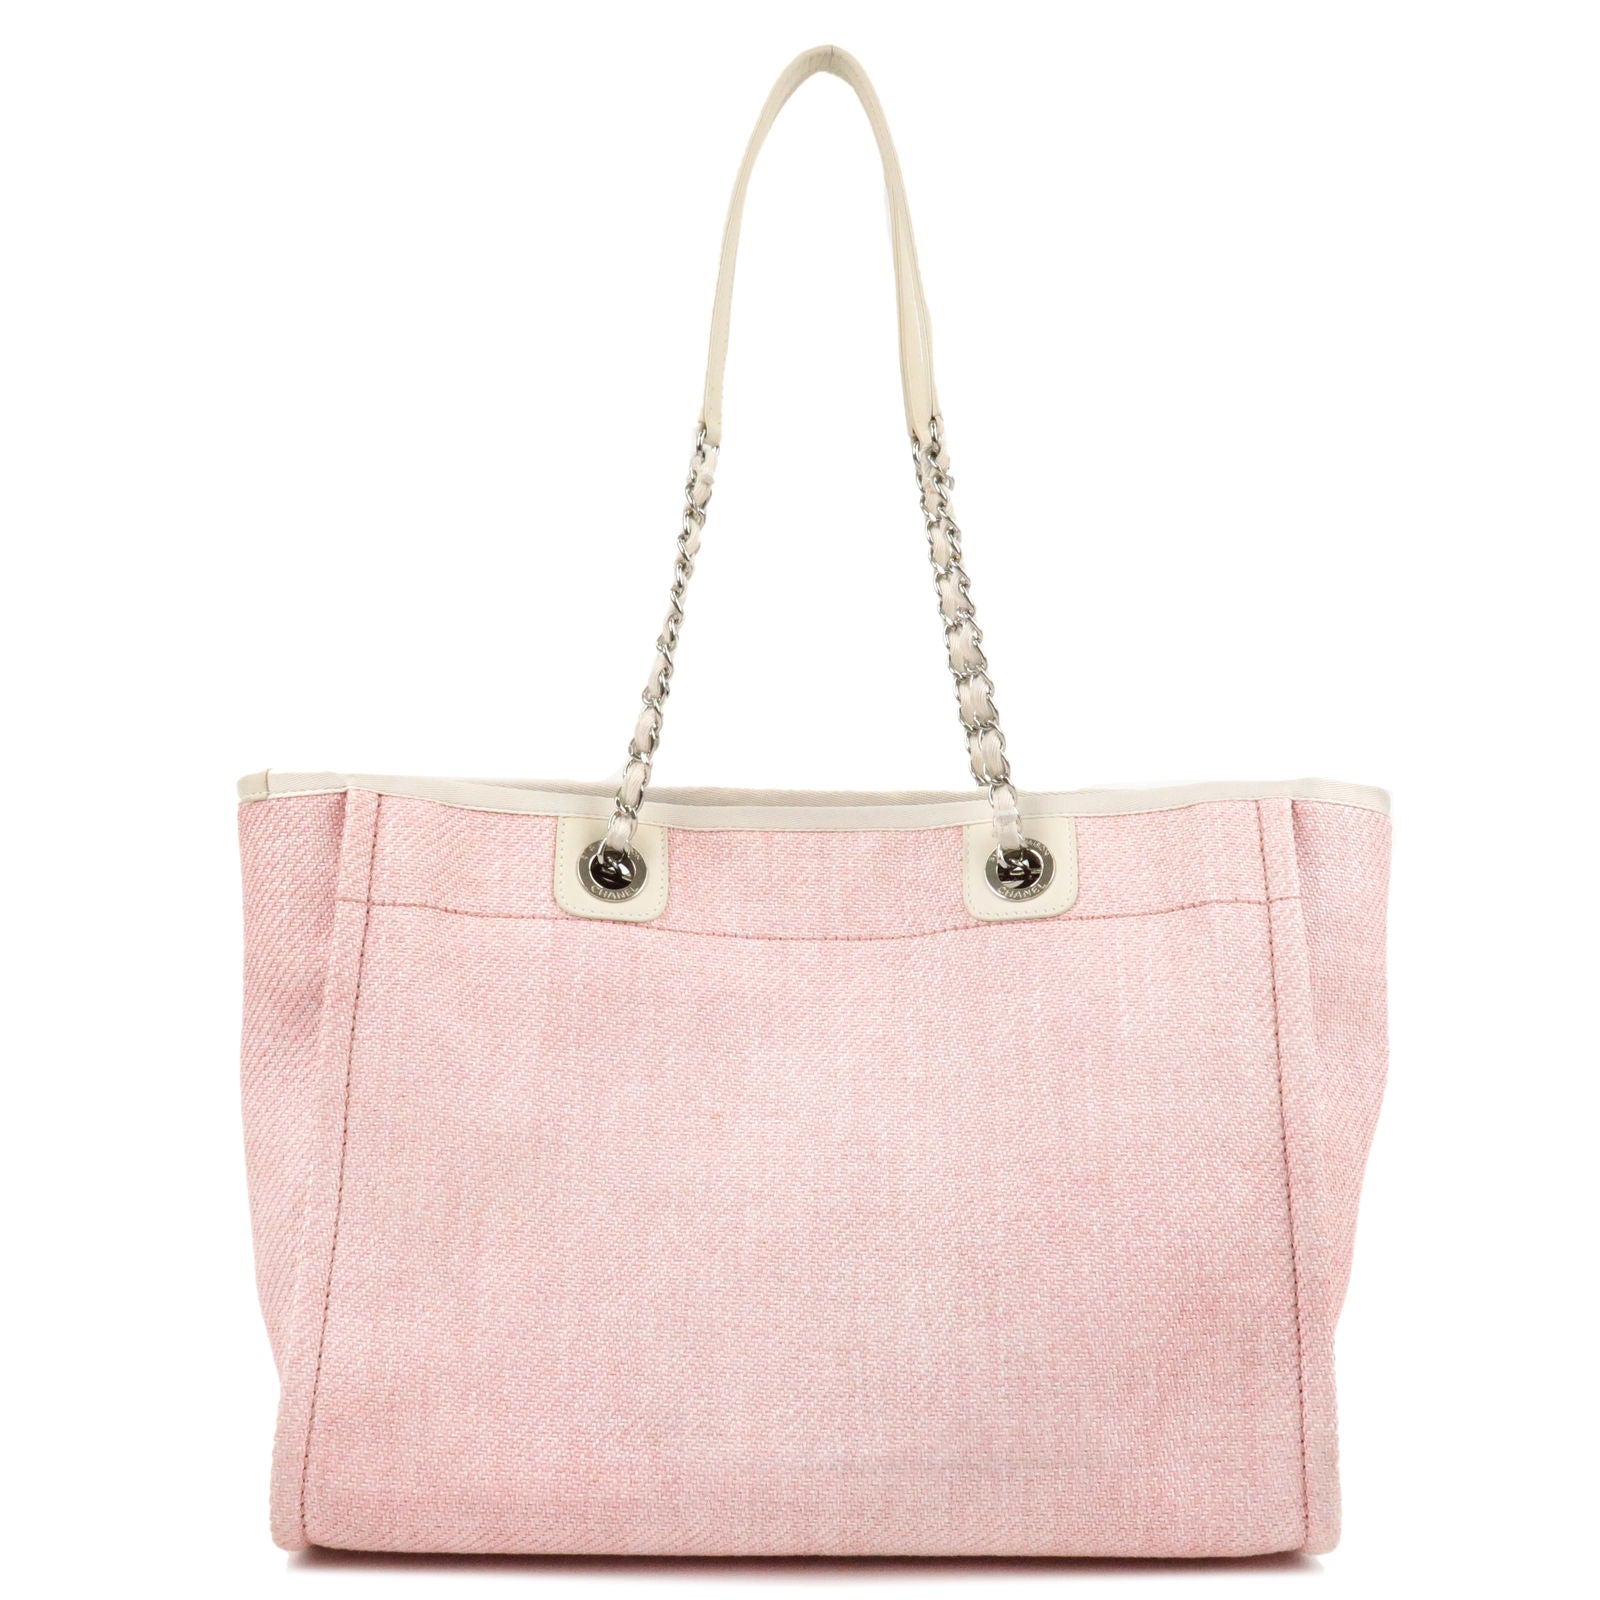 CHANEL-Deauville-Canvas-Leather-Chain-Tote-Bag-Pink-White-A67001